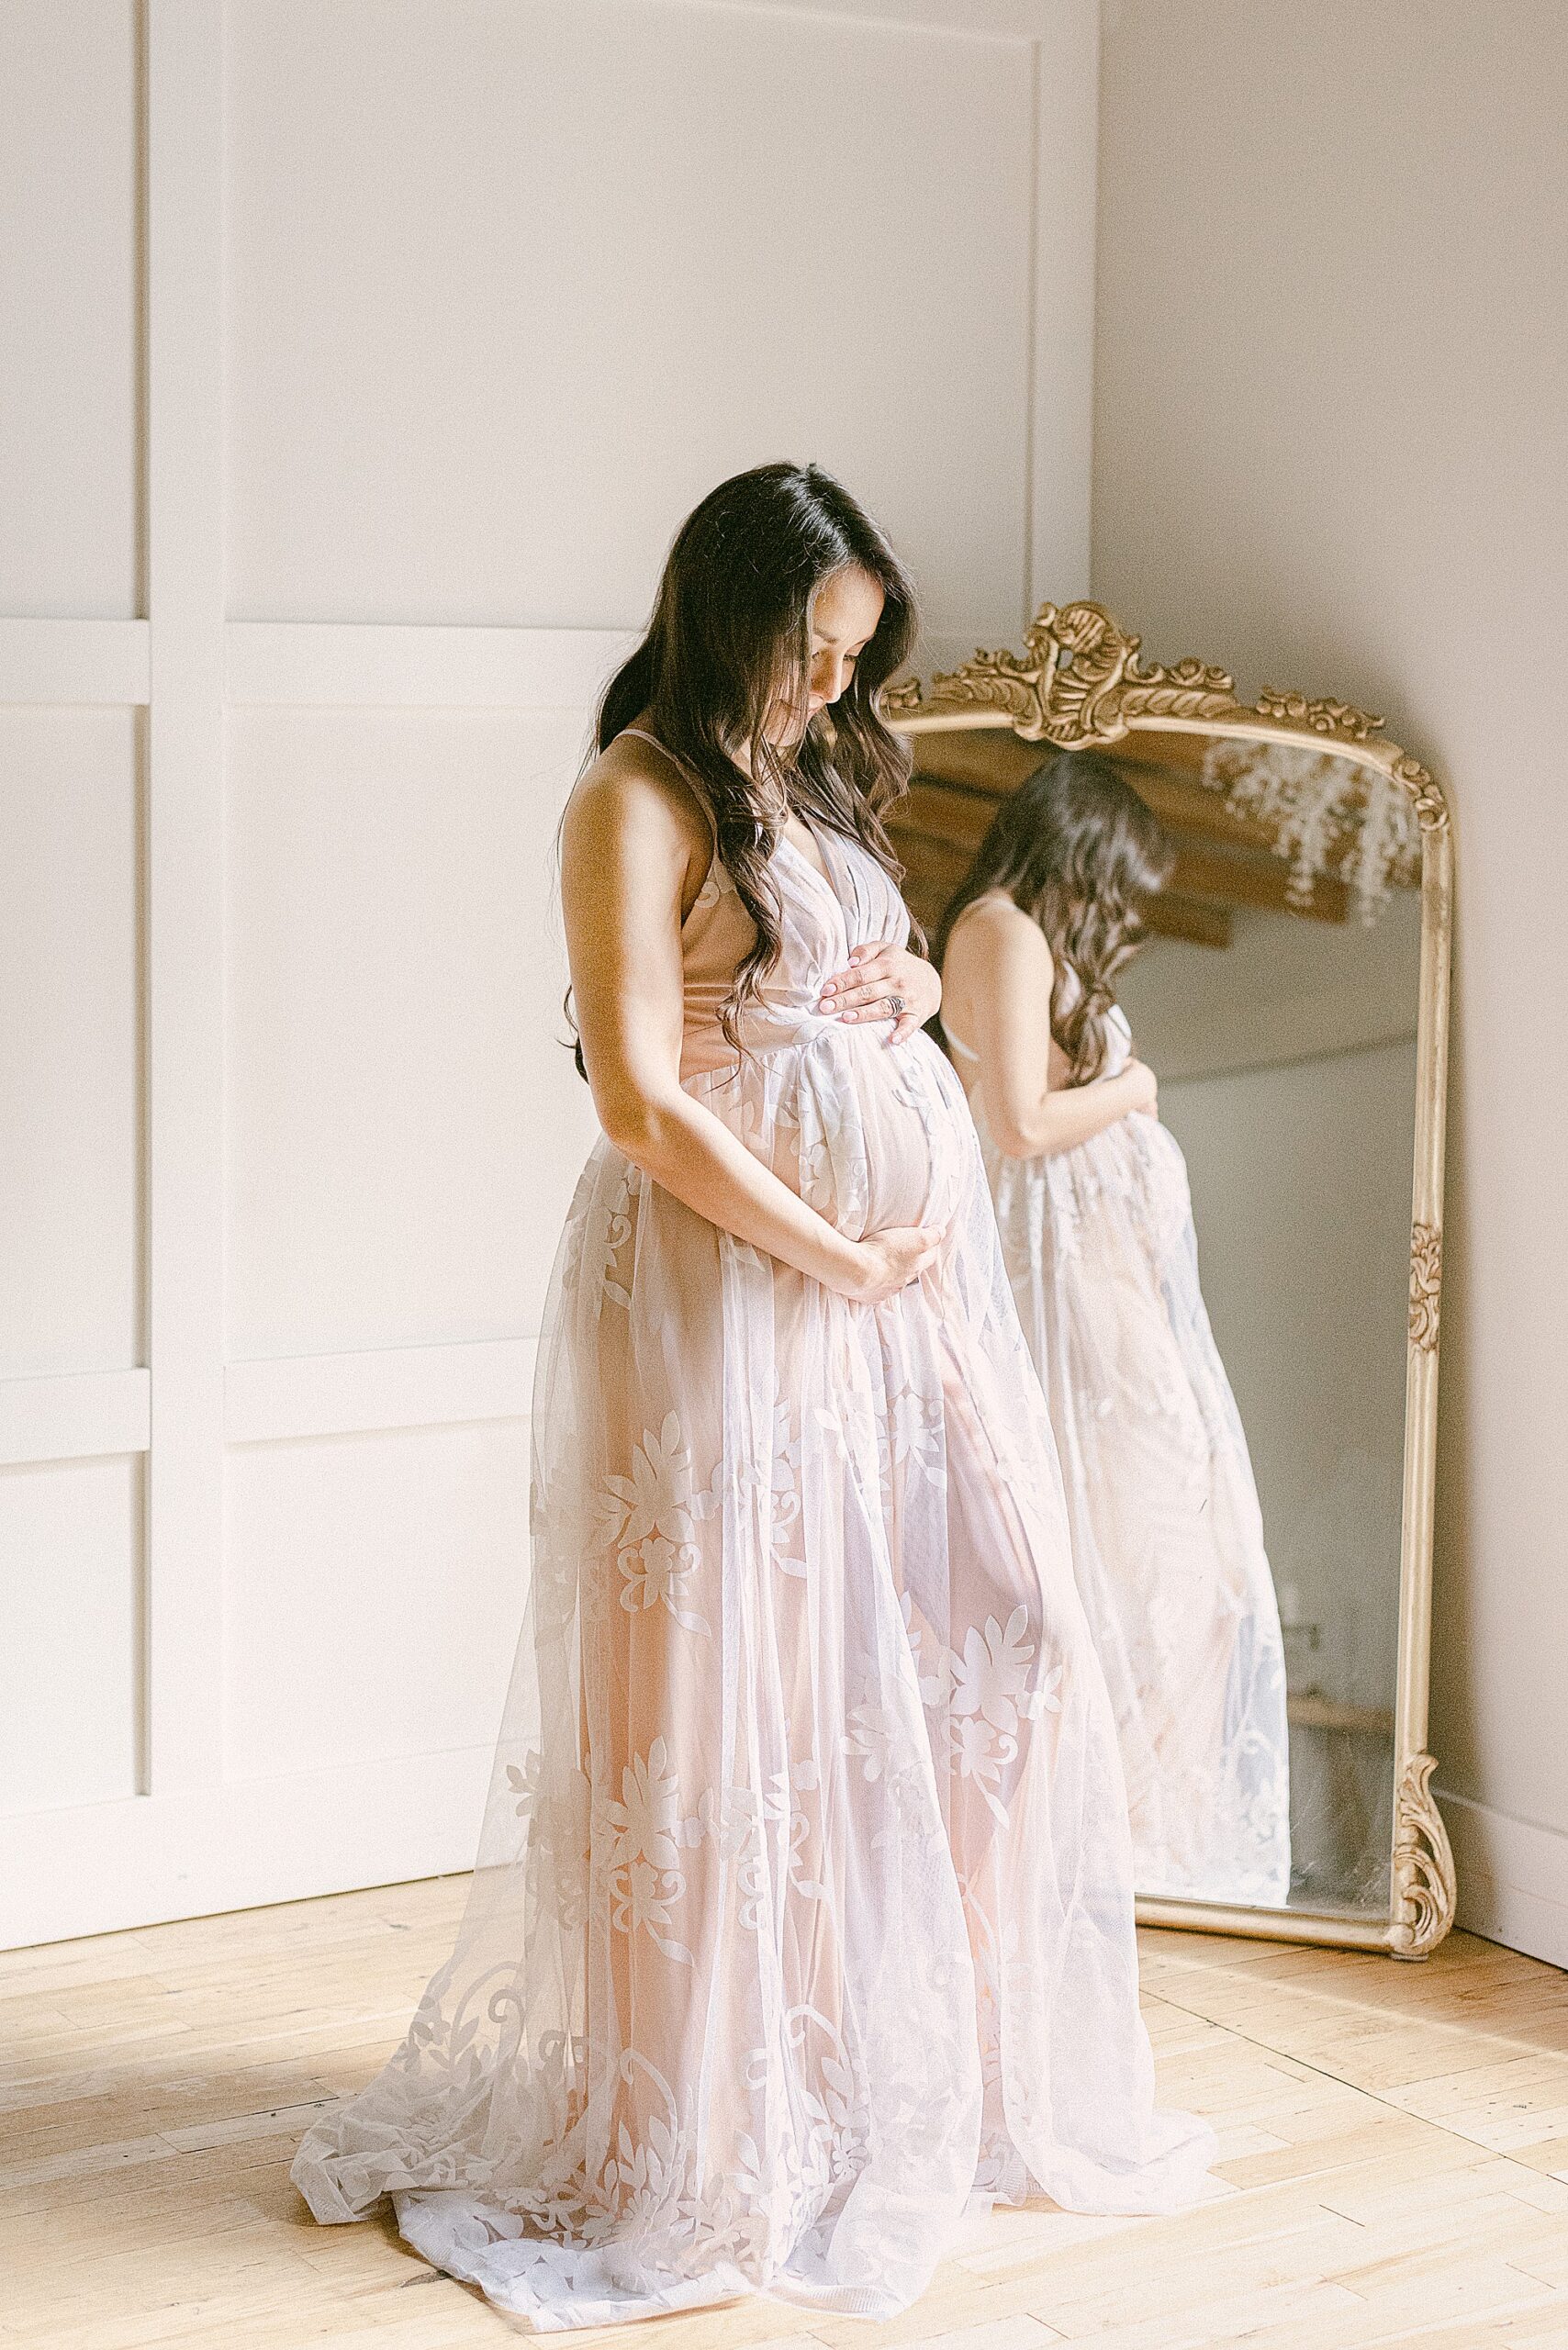 Expecting mom in elegant white lace dress in front of anthropologie gold mirror holding baby bump. She's standing in-studio with board and batten walls.